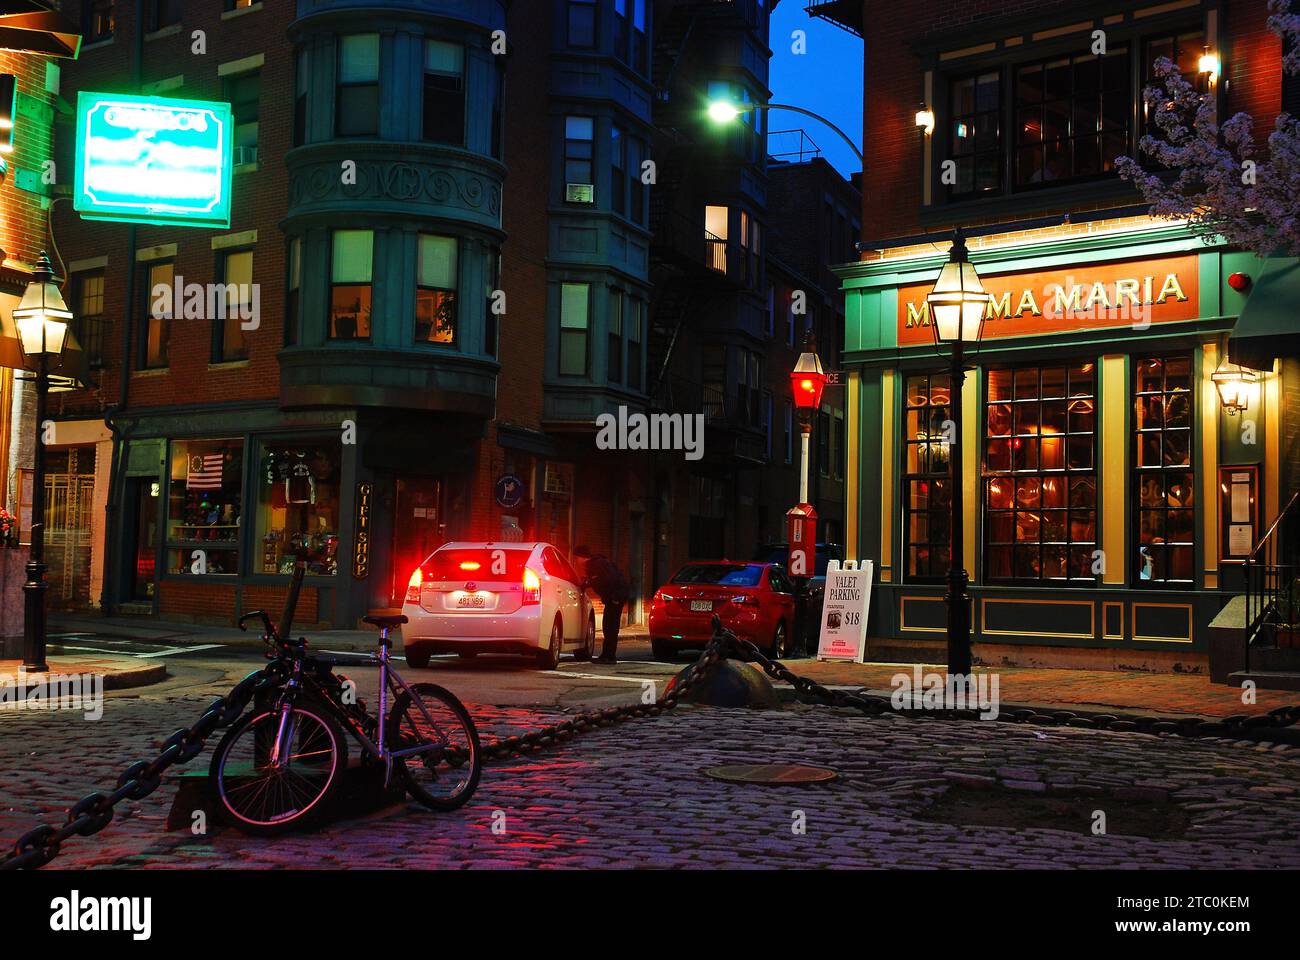 A bike is chained to a larger chain, surrounded by Italian restaurants and cafes in the North End district of Boston Stock Photo